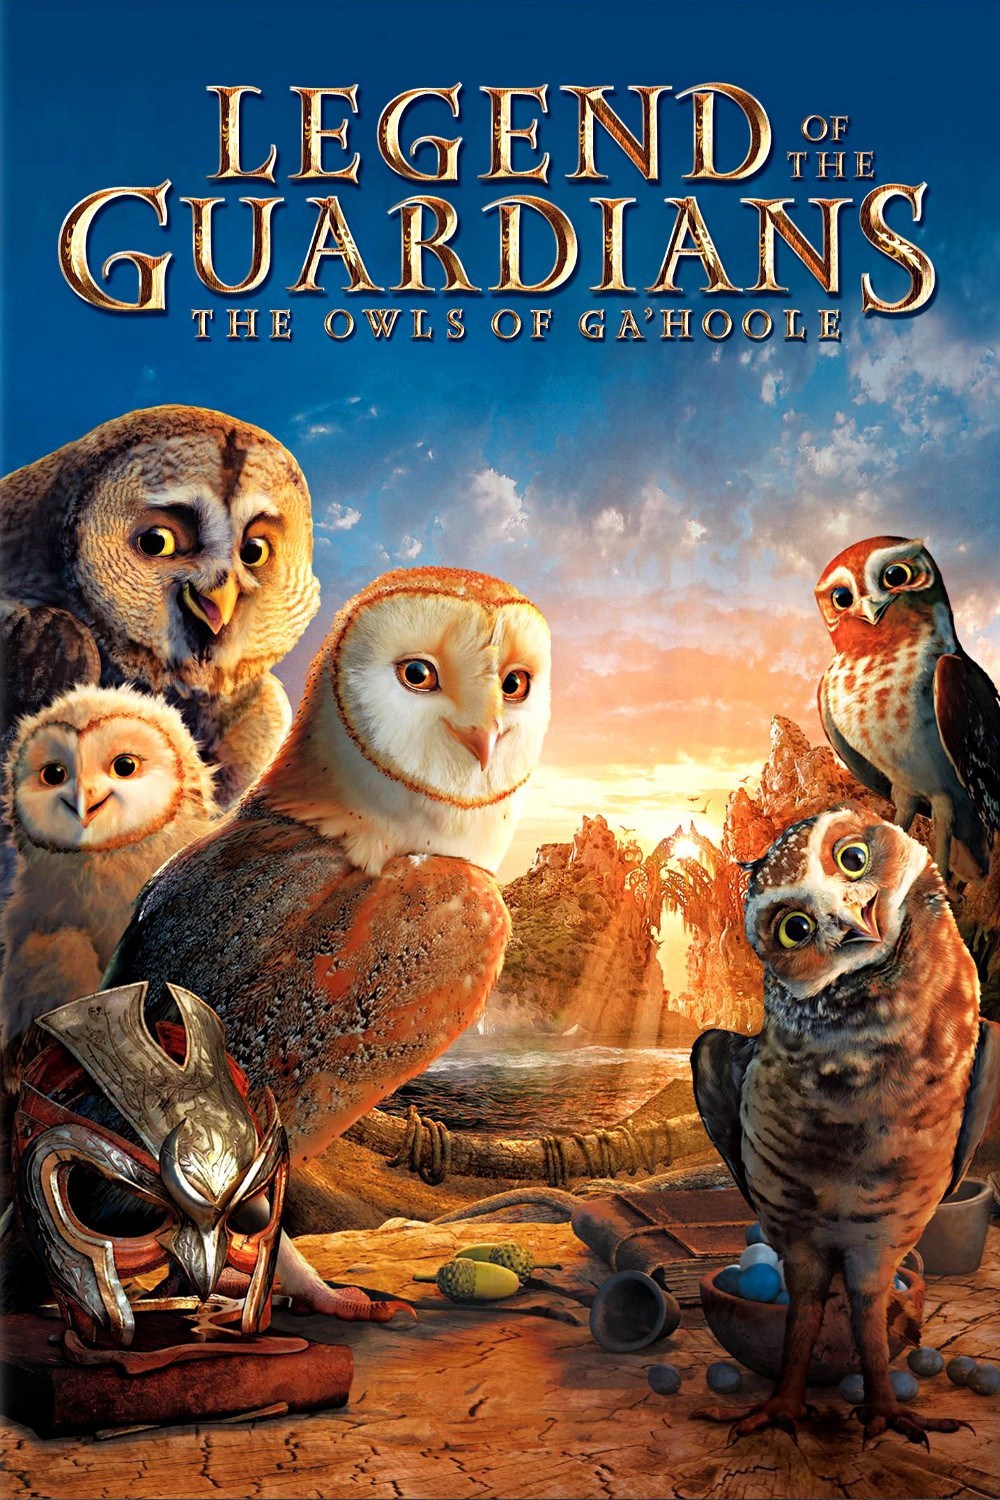 Legend of the guardians : the owls of Ga'Hoole